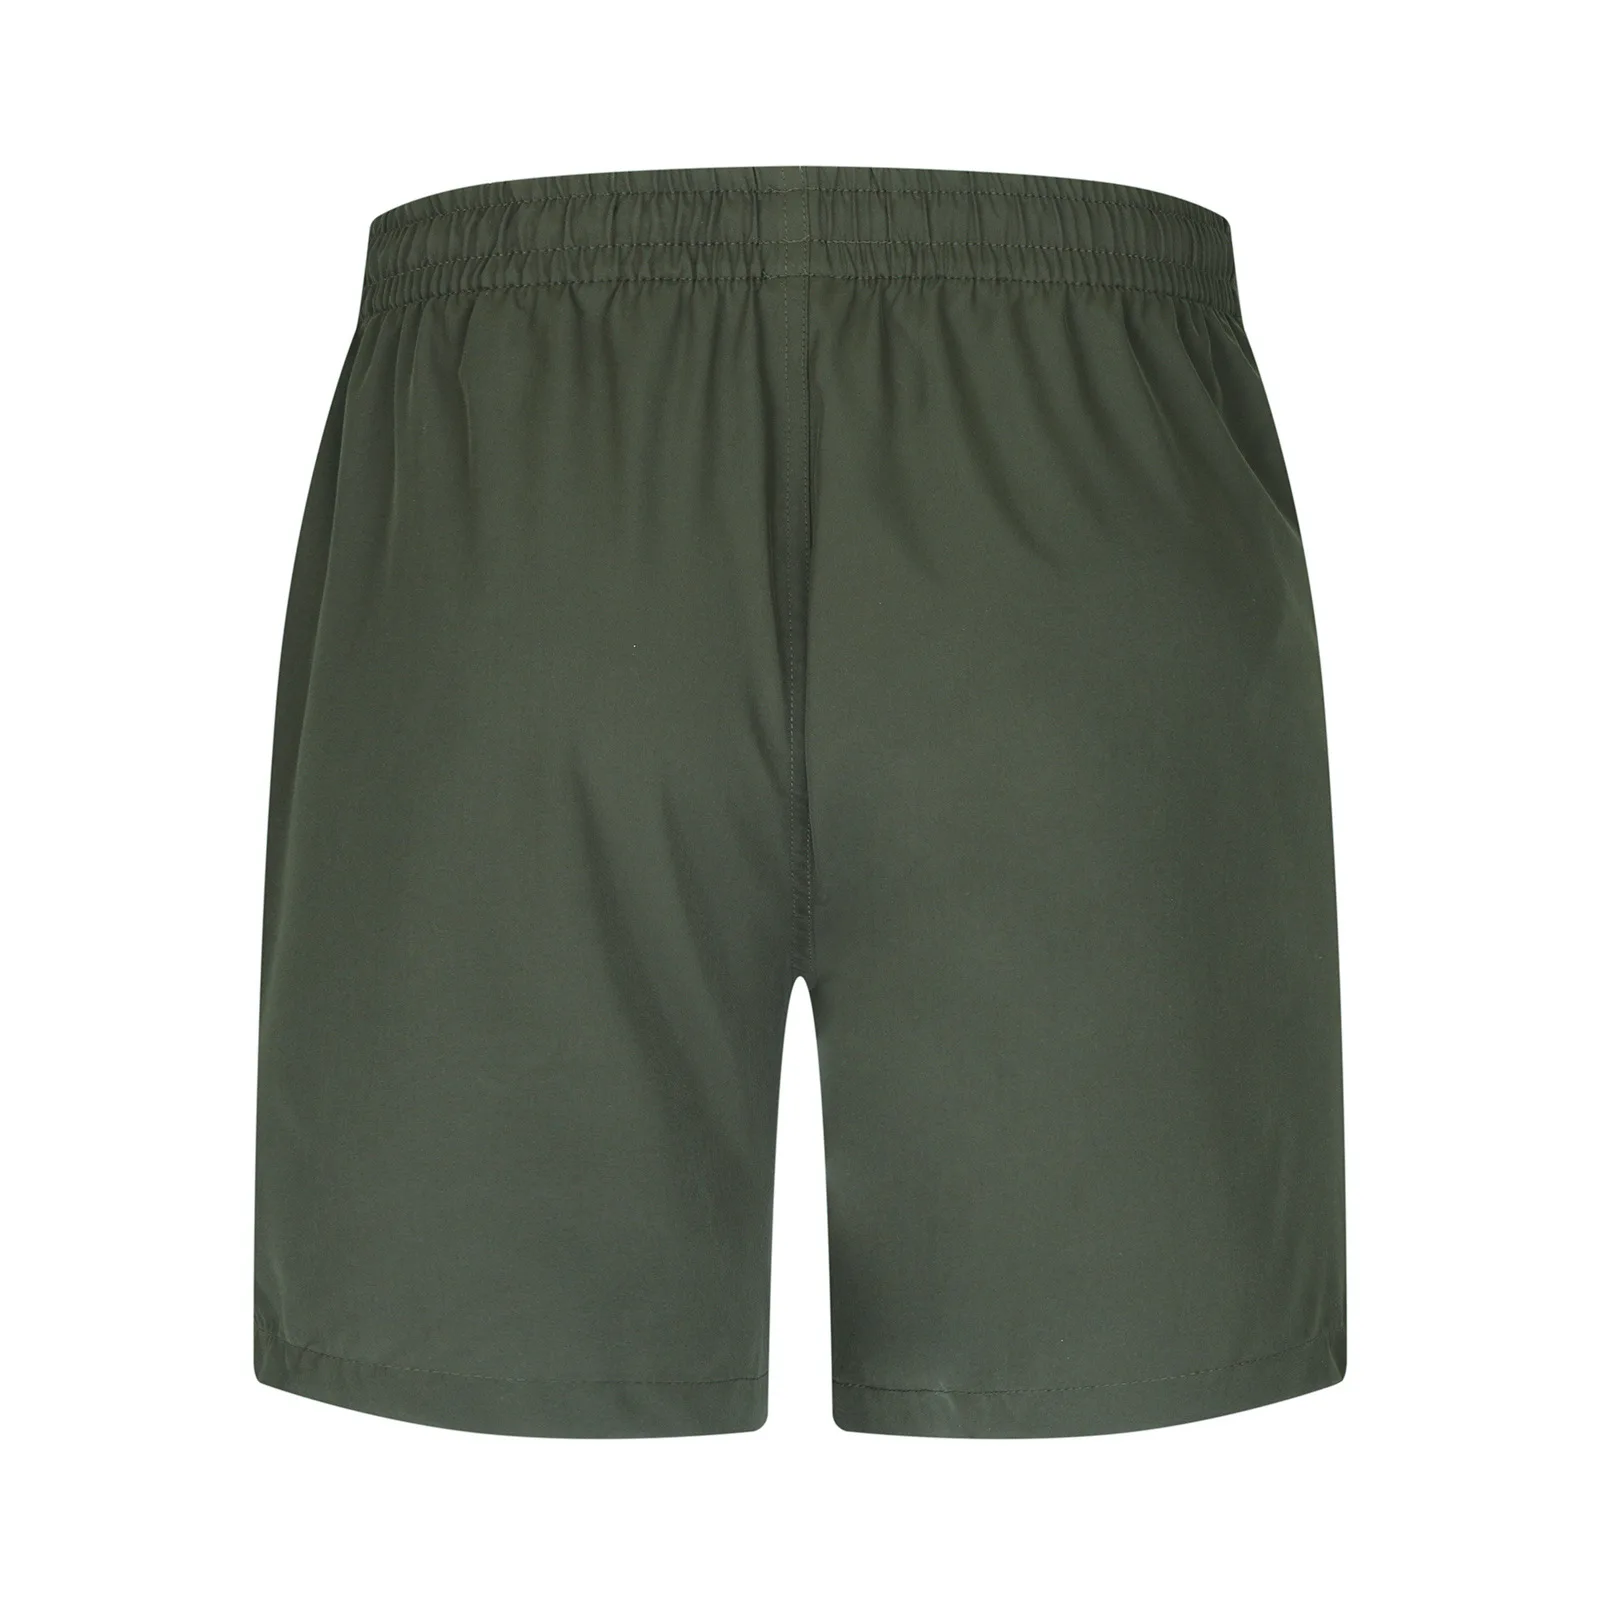 Teens Swim Trunks Quick Dry Beach Board Shorts with Pockets 